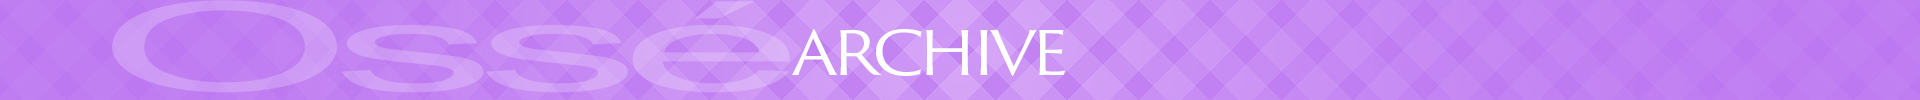 Archive_Banner